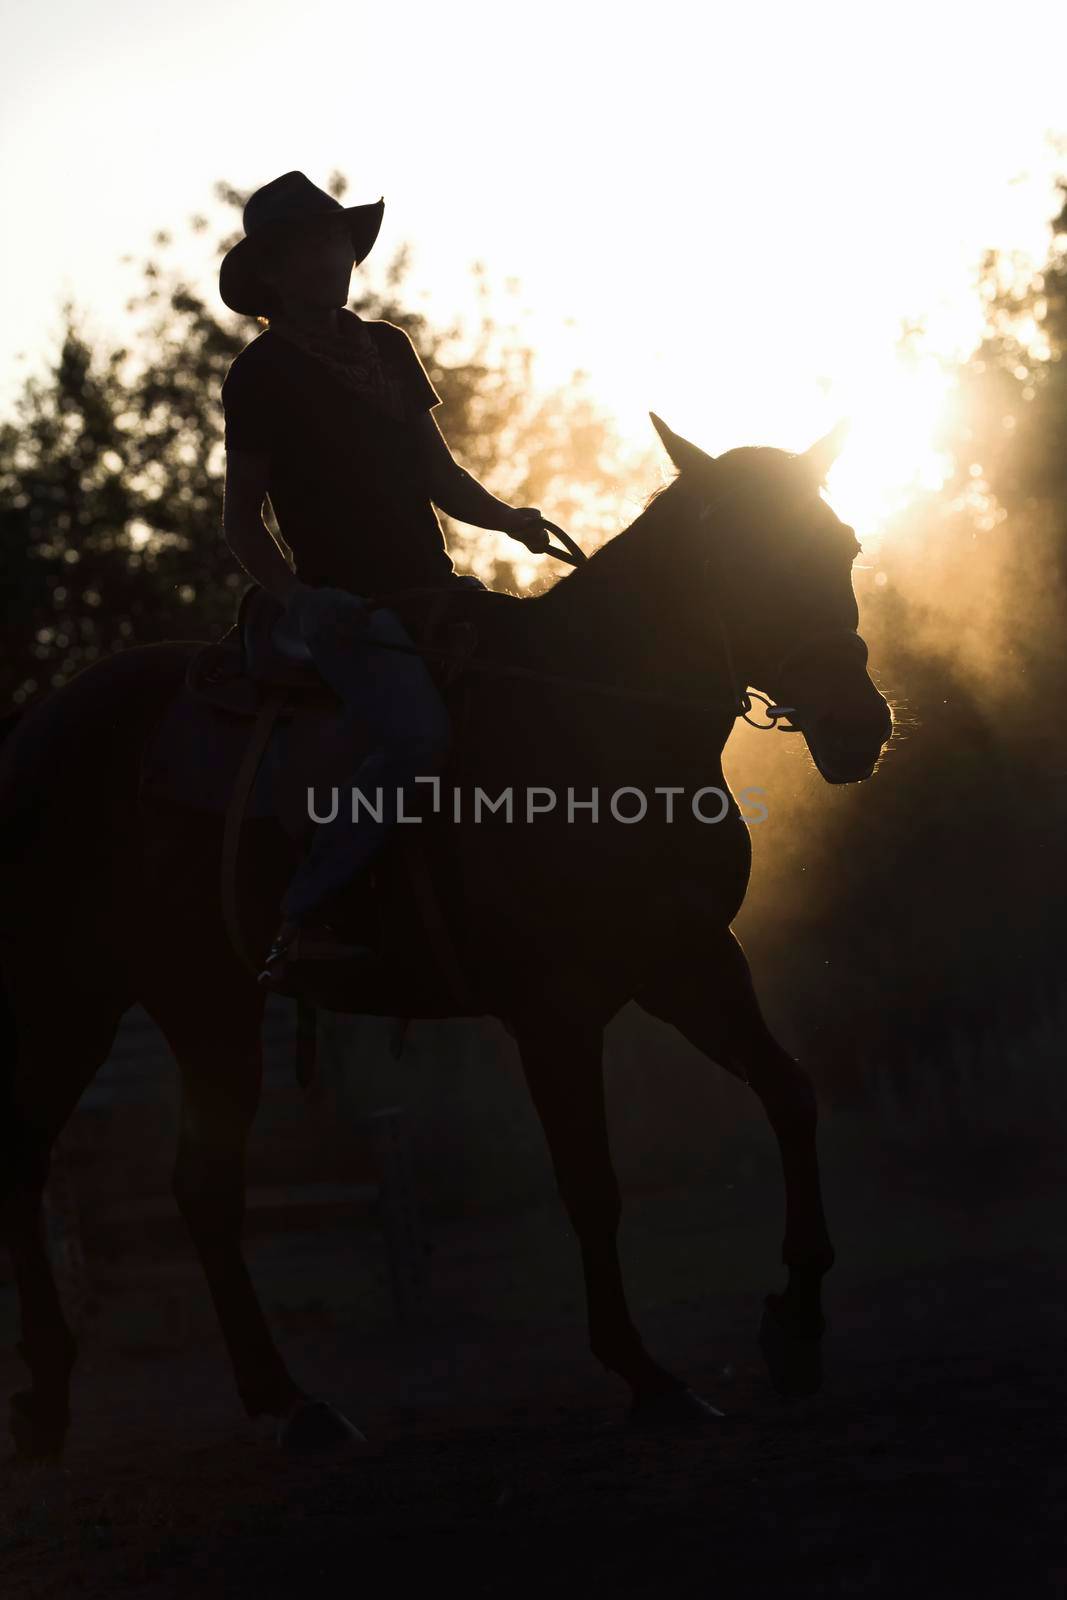 Silhouette of a woman riding a horse - sunset or sunrise by Studia72